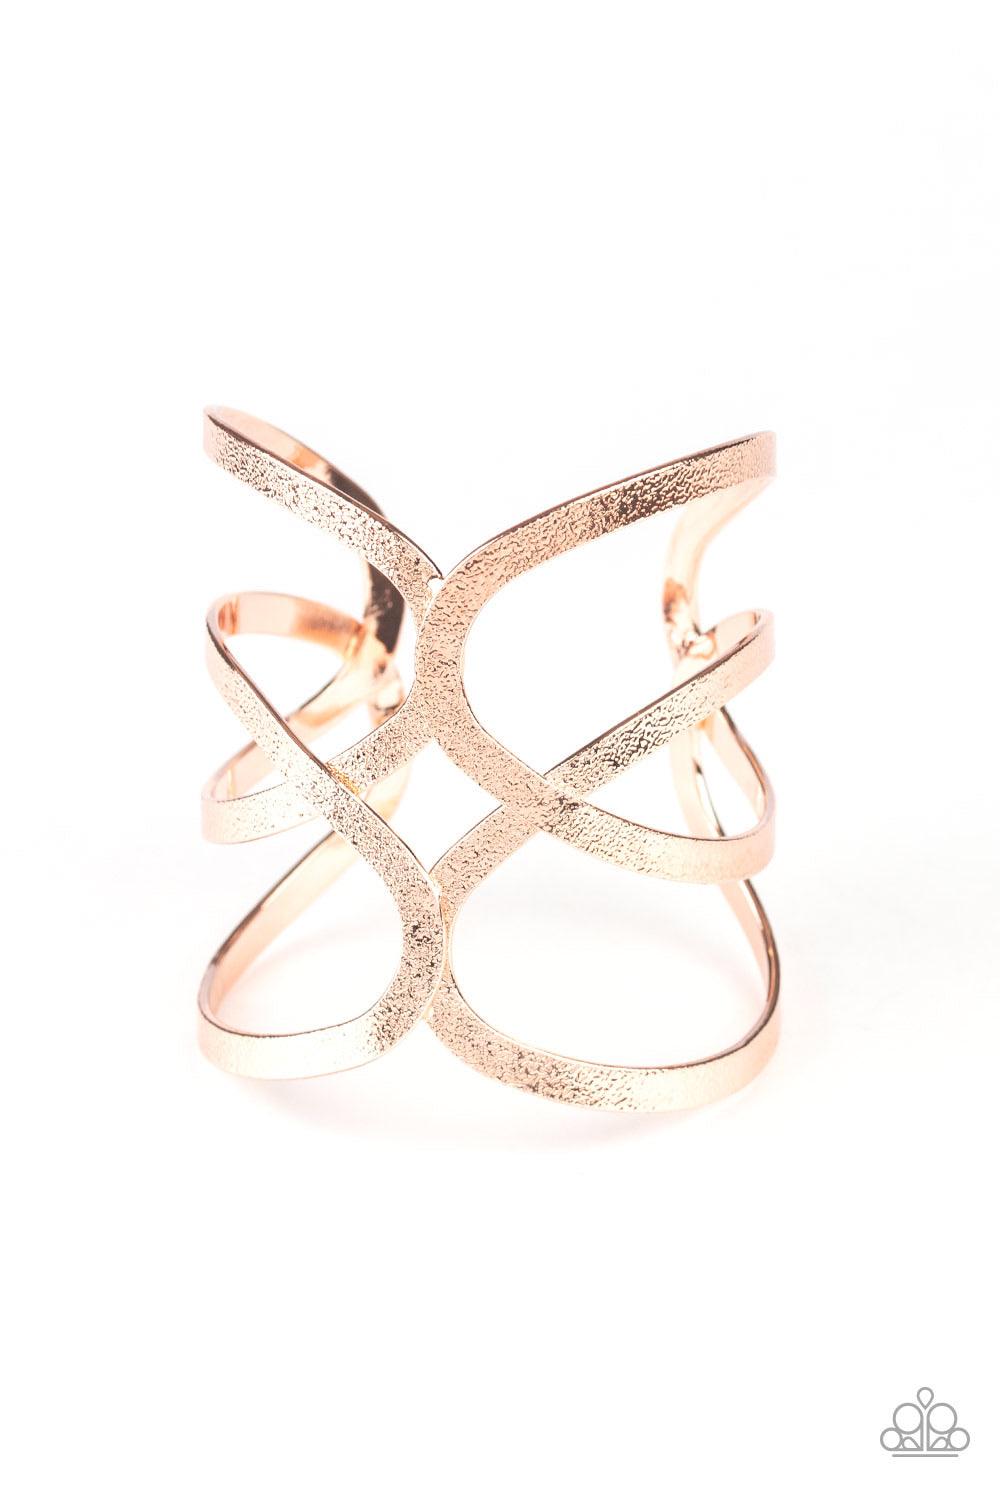 Paparazzi Accessories Crossing The Finish Line - Rose Gold Delicately hammered in endless shimmer, glistening rose gold bars crisscross across the wrist, coalescing into a bold cuff. Jewelry